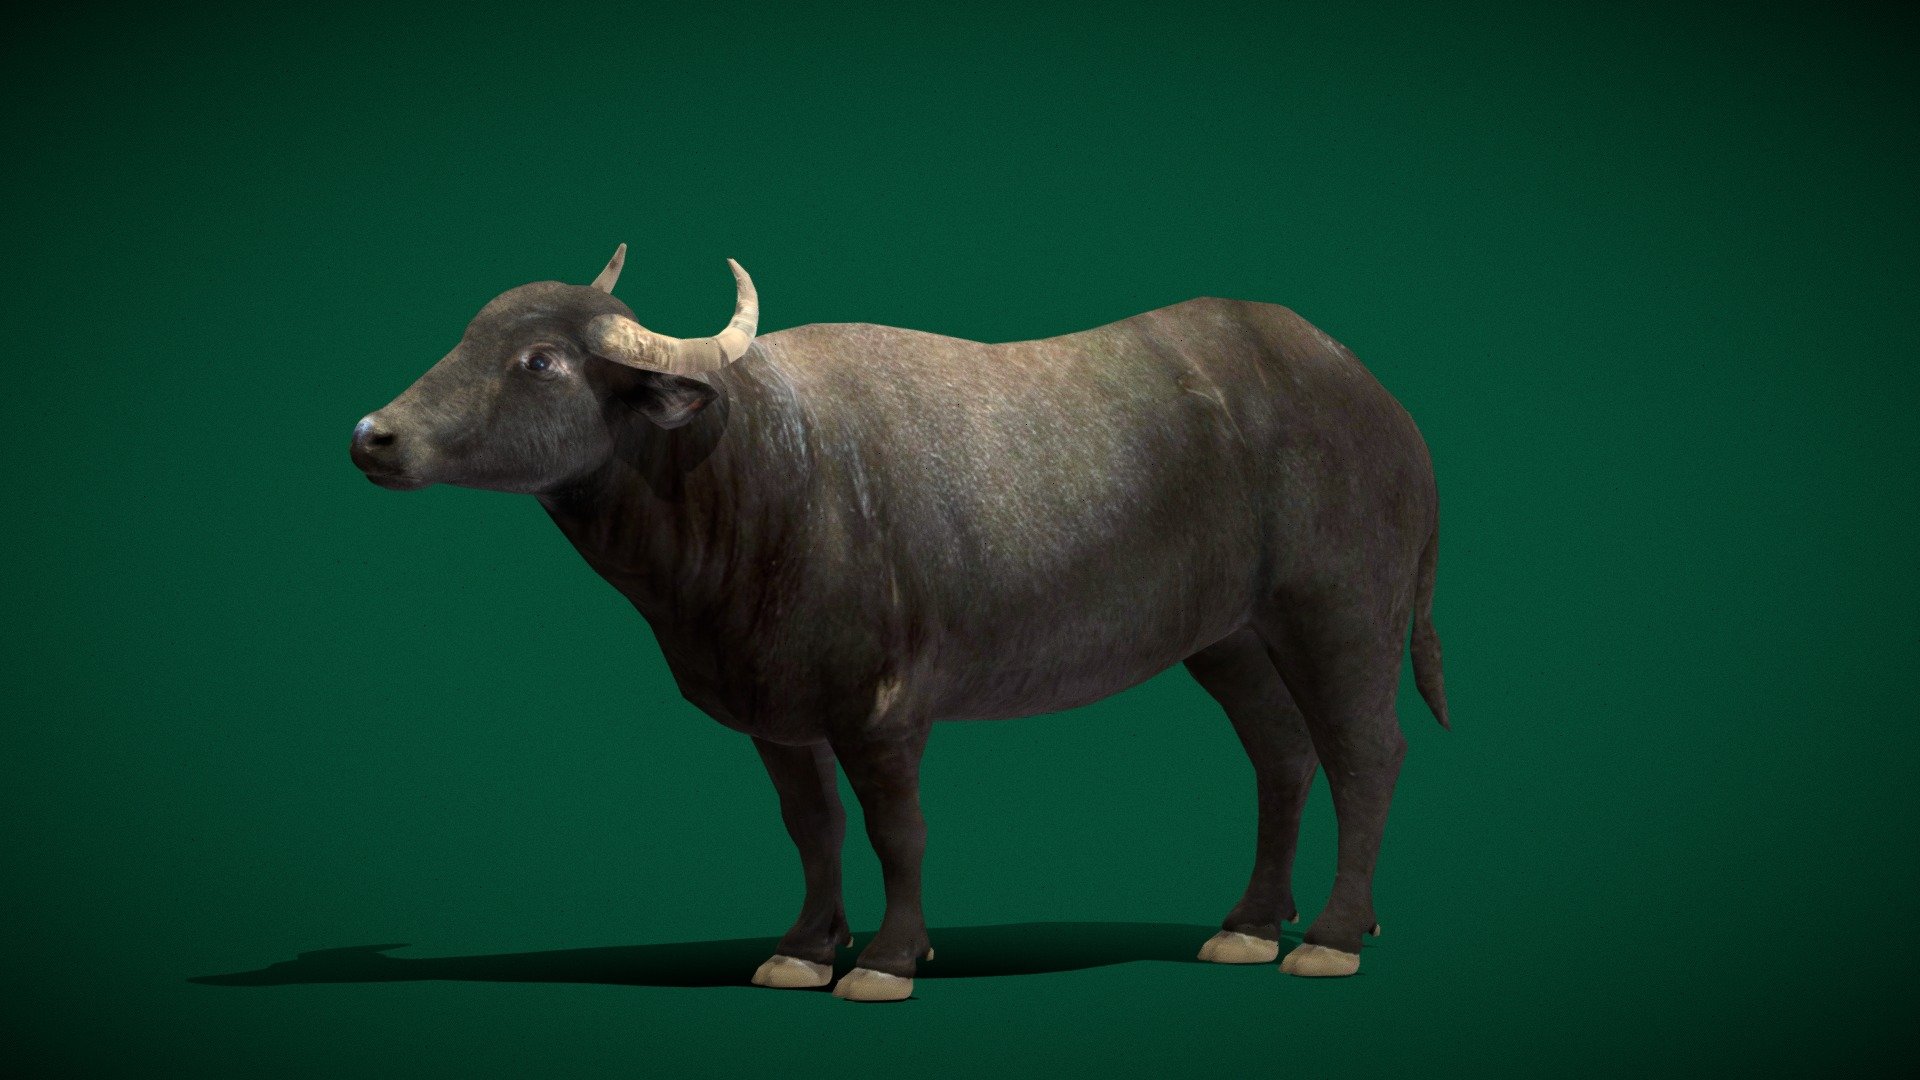 Bubalus bubalis (Asian Buffalo)

Domestic water buffalo Male   (Low poly)

1 Draw Calls

Single Animations

4K PBR Textures Material

Unreal FBX

Unity FBX  

Blend File 

USDZ File (AR Ready). Real Scale Dimension

Textures Files

GLB File

Gltf File ( Spark AR, Lens Studio(SnapChat) , Effector(Tiktok) , Spline, Play Canvas ) Compatible

Triangles: 6132
Vertices: 3085
 Diffuse , Metallic, Roughness , Normal Map ,Specular Map,AO
 
The water buffalo, also called the domestic water buffalo or Asian water buffalo, is a large bovid originating in the Indian subcontinent and Southeast Asia. Today, it is also found in Italy, the Balkans, Australia, North America, South America and some African countries. Wikipedia
Scientific name: Bubalus_bubalis - Water Buffalo (Lowpoly) - 3D model by Nyilonelycompany 3d model